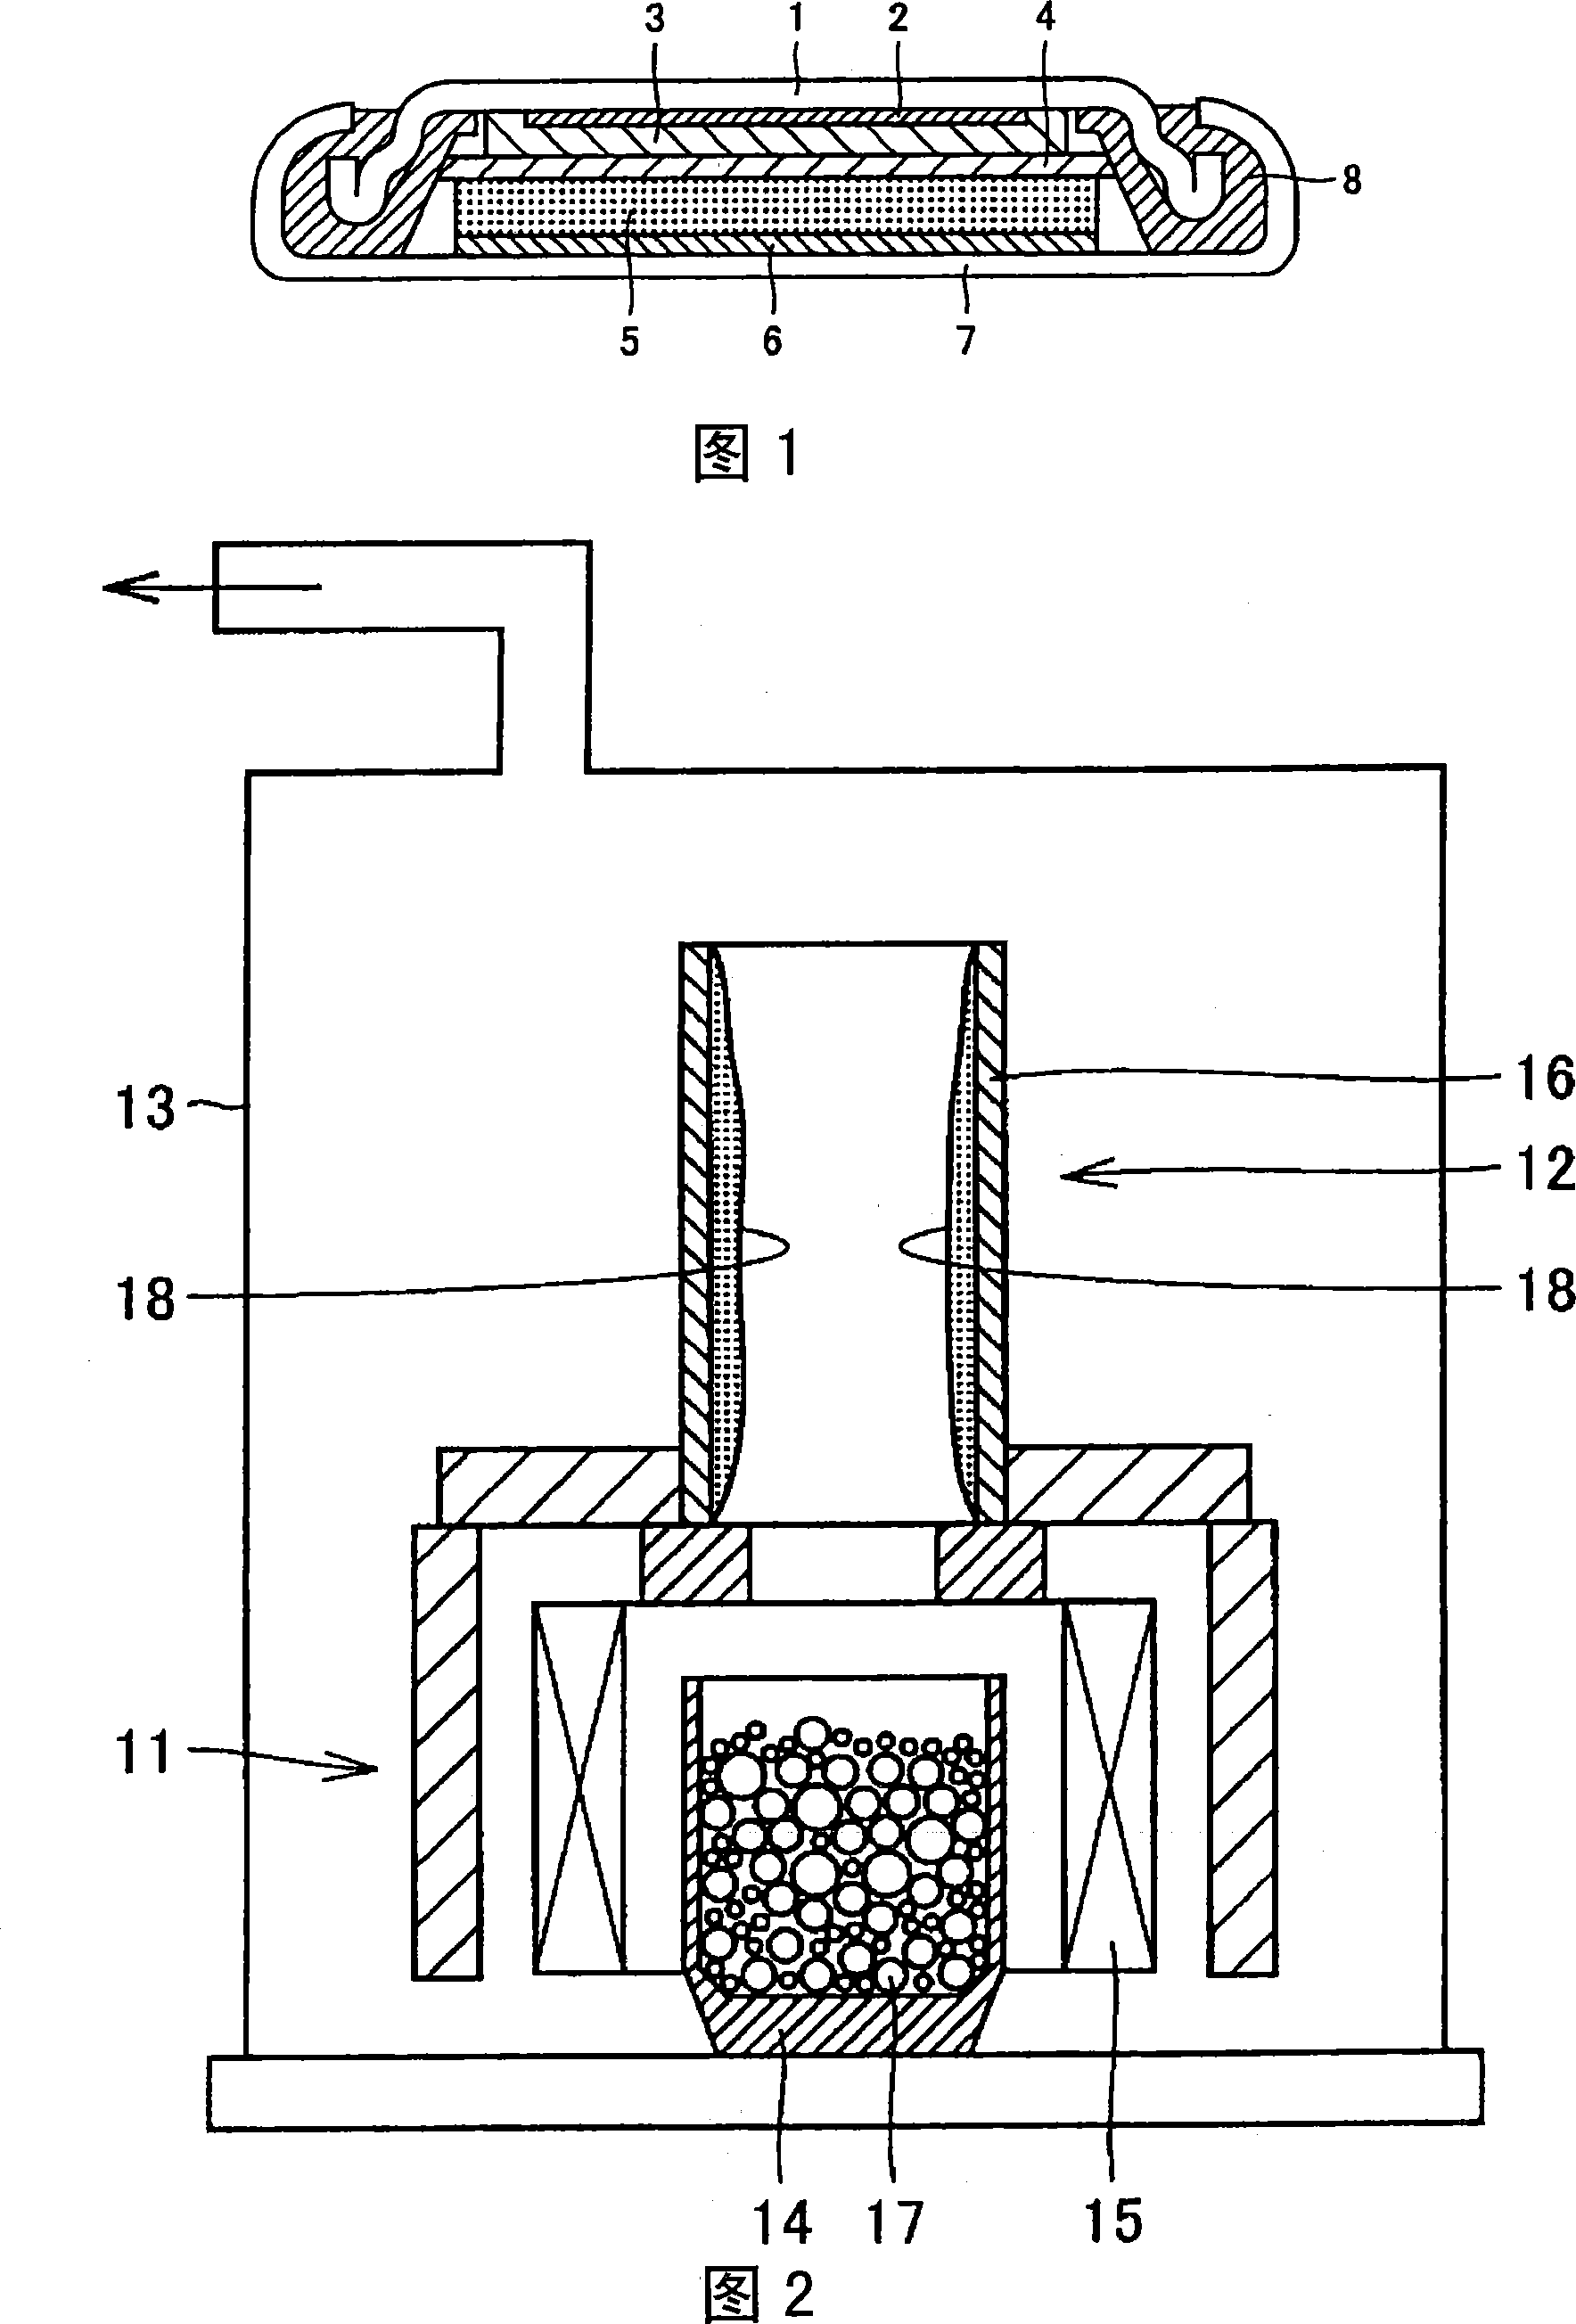 SiO powder for secondary battery and process for producing the same